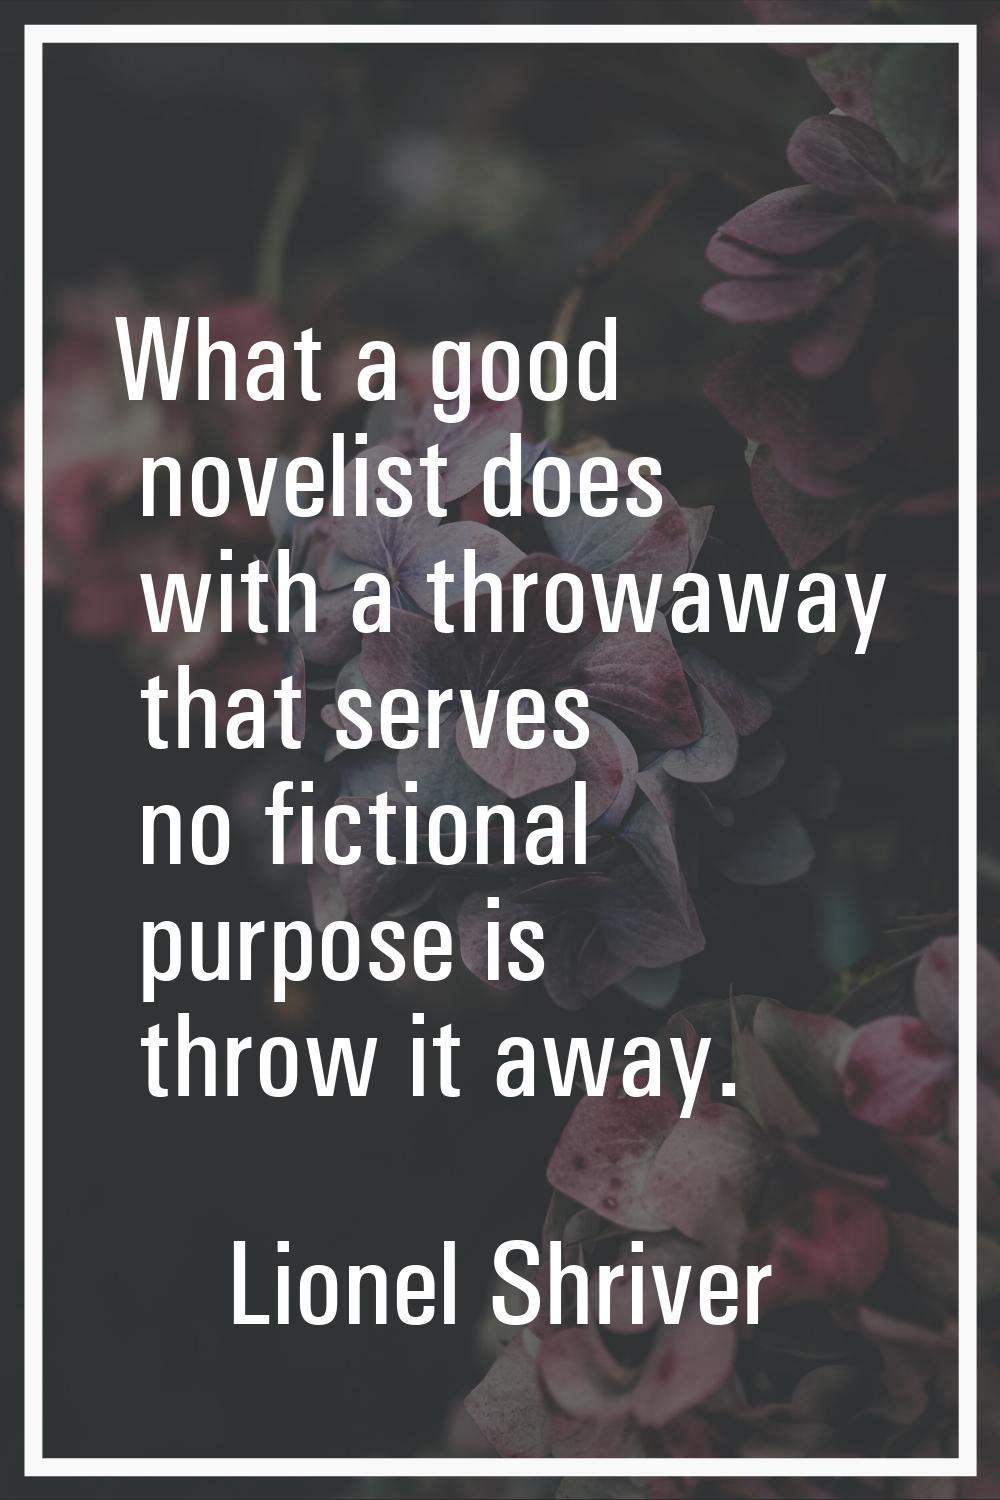 What a good novelist does with a throwaway that serves no fictional purpose is throw it away.